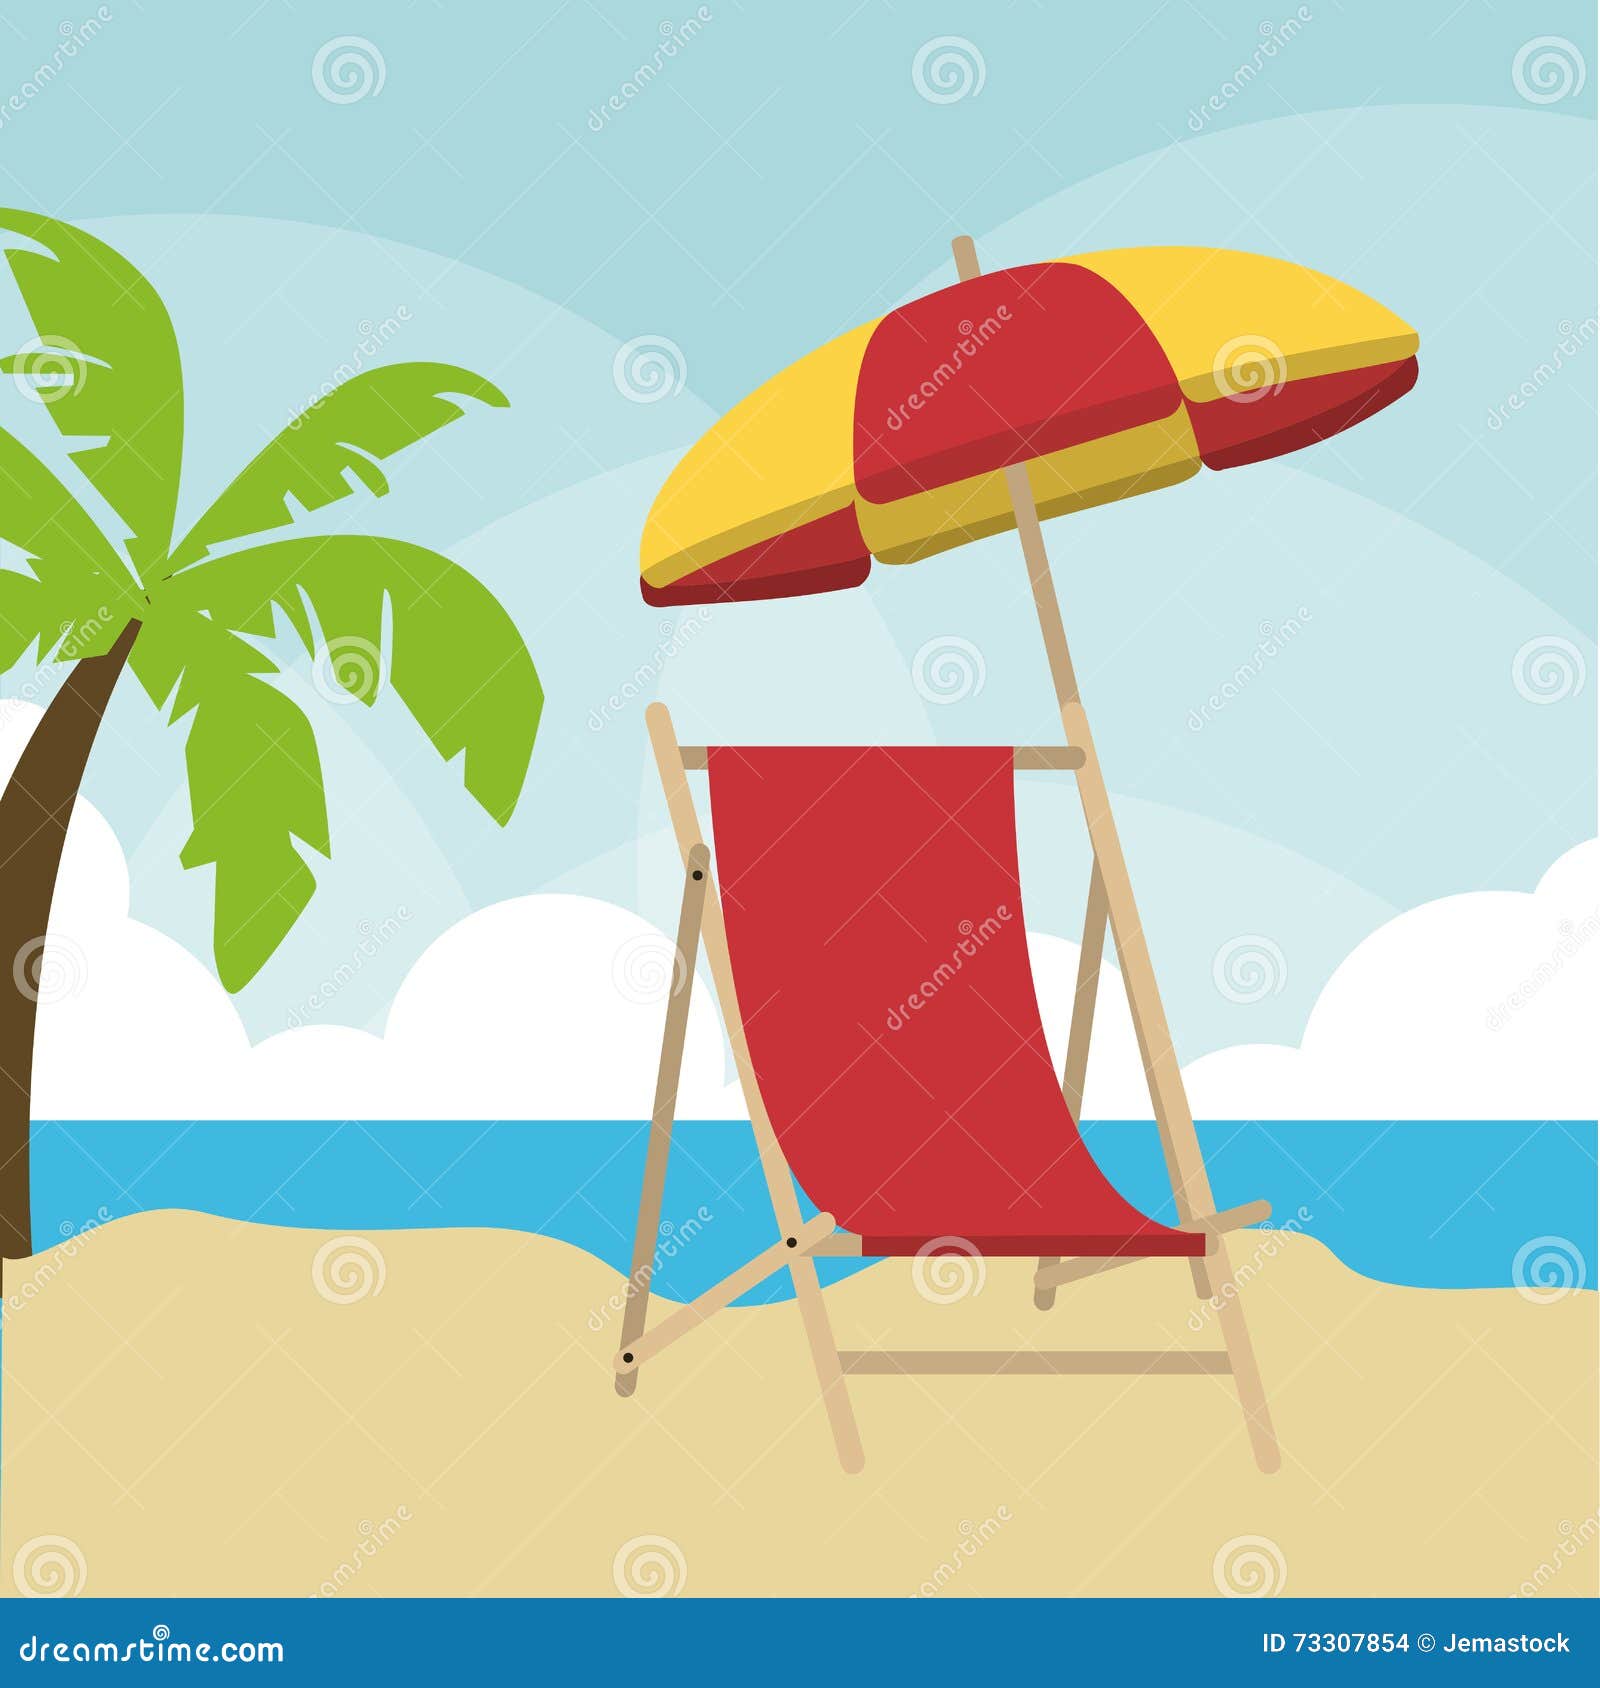 Summer Design. Palm Tree and Chair Icon. Graphic Stock Illustration ...